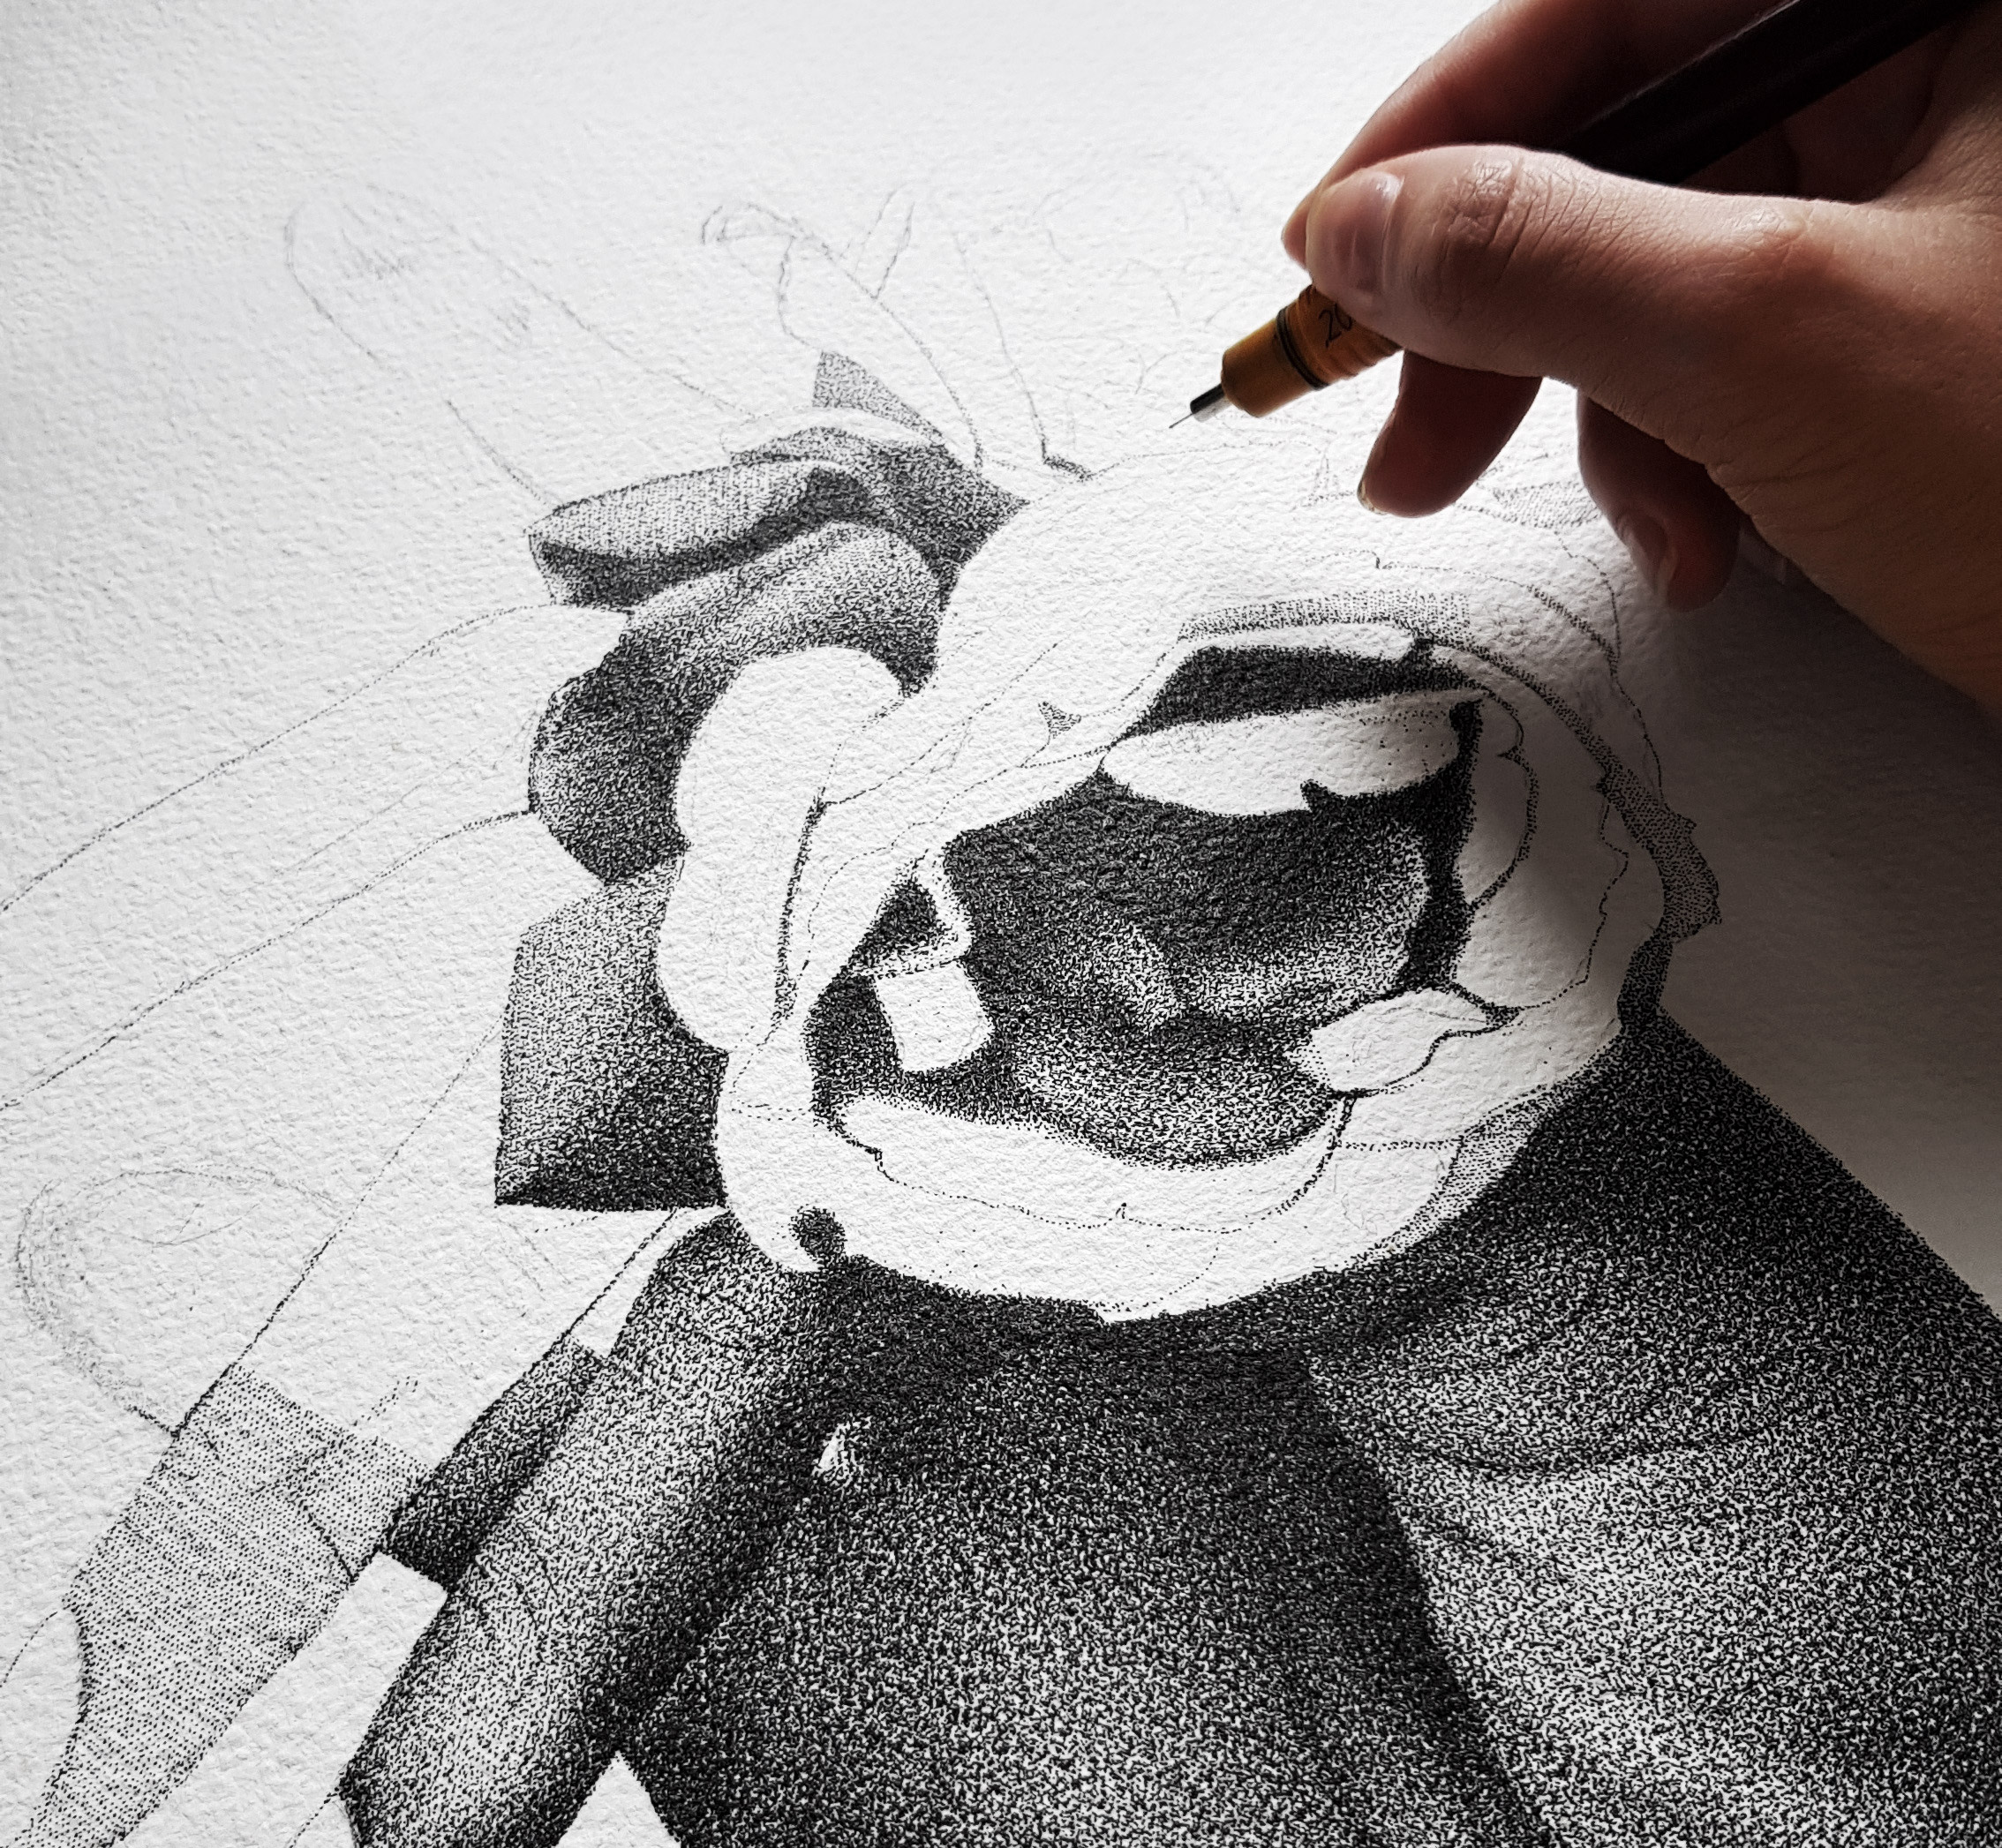 Pen and ink illustration of a squirrel drawn in stipple dots by Jen Borror   Hoot Design Studio on Dribbble